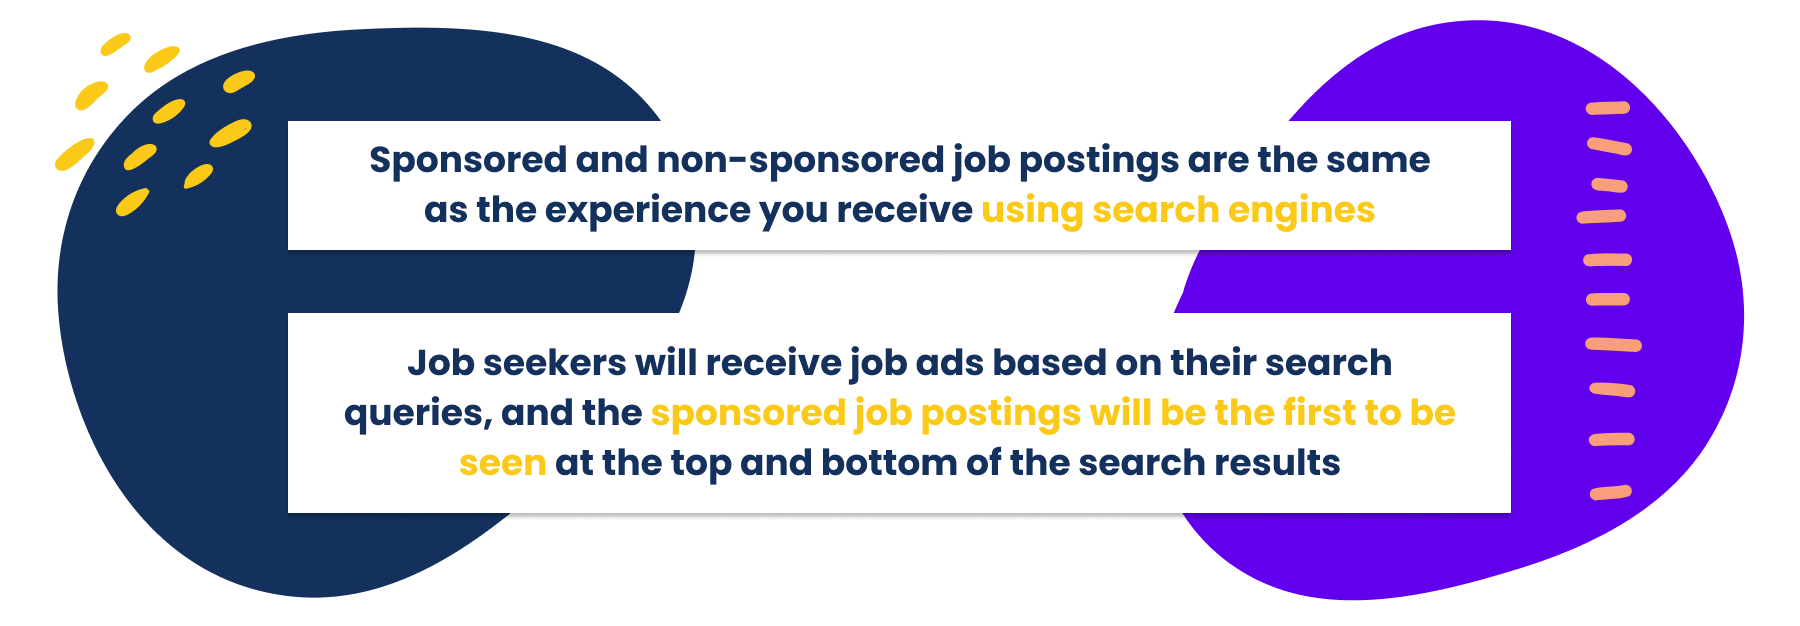 What Is The Difference Between Non Sponsored And Sponsored Job Postings